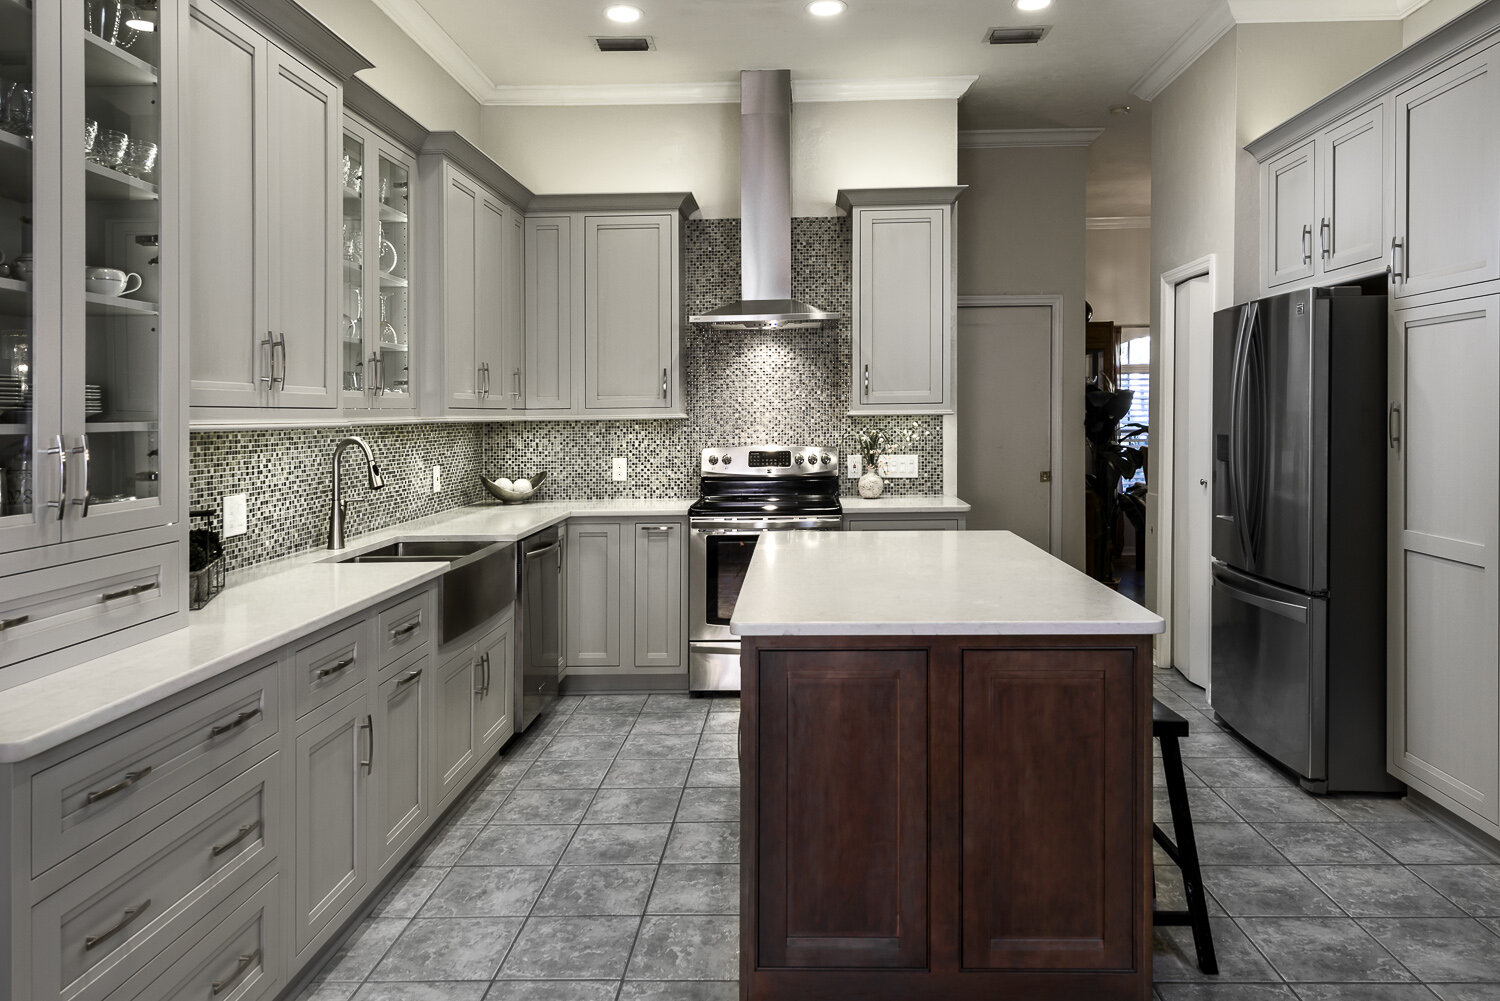 kitchen design with gray tiles